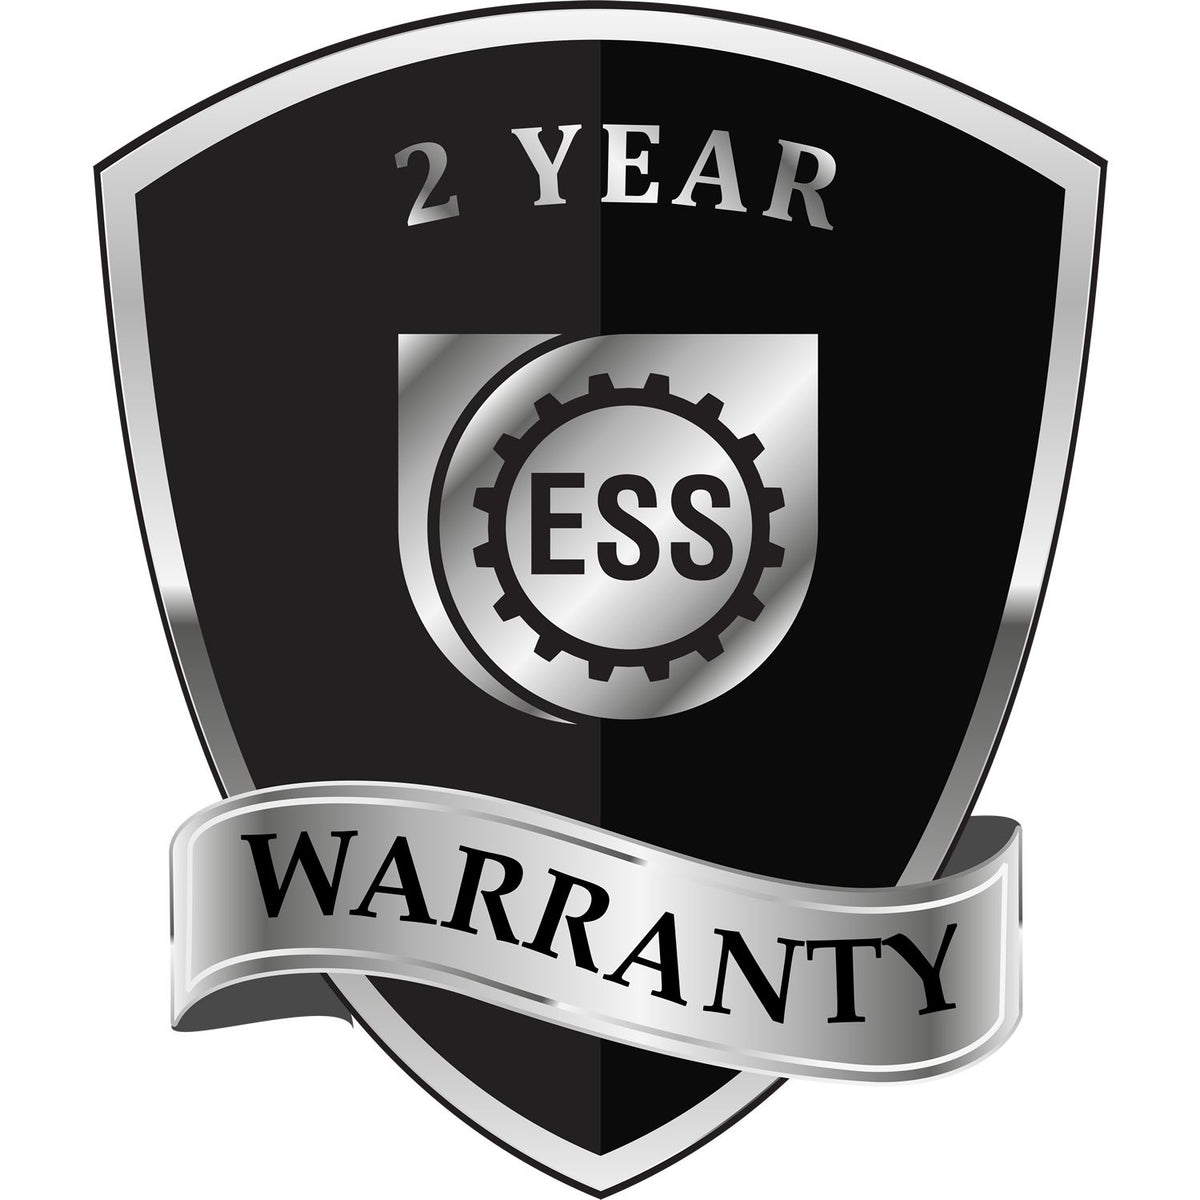 A black and silver badge or emblem showing warranty information for the State of Hawaii Extended Long Reach Geologist Seal